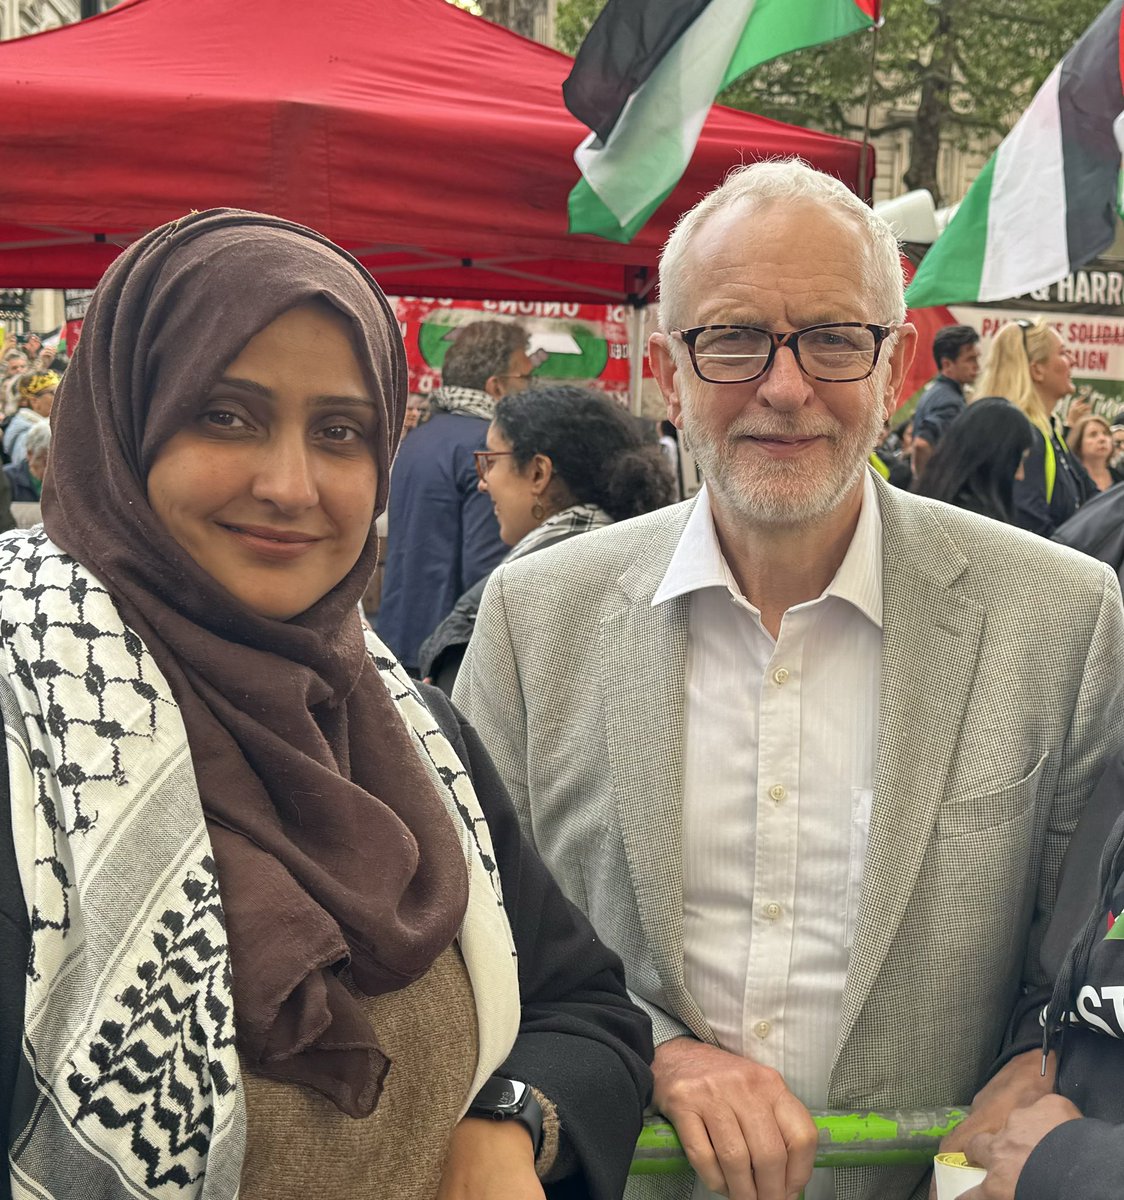 With the Great Jeremy Corbyn. Who always spoke for People of Palestine.